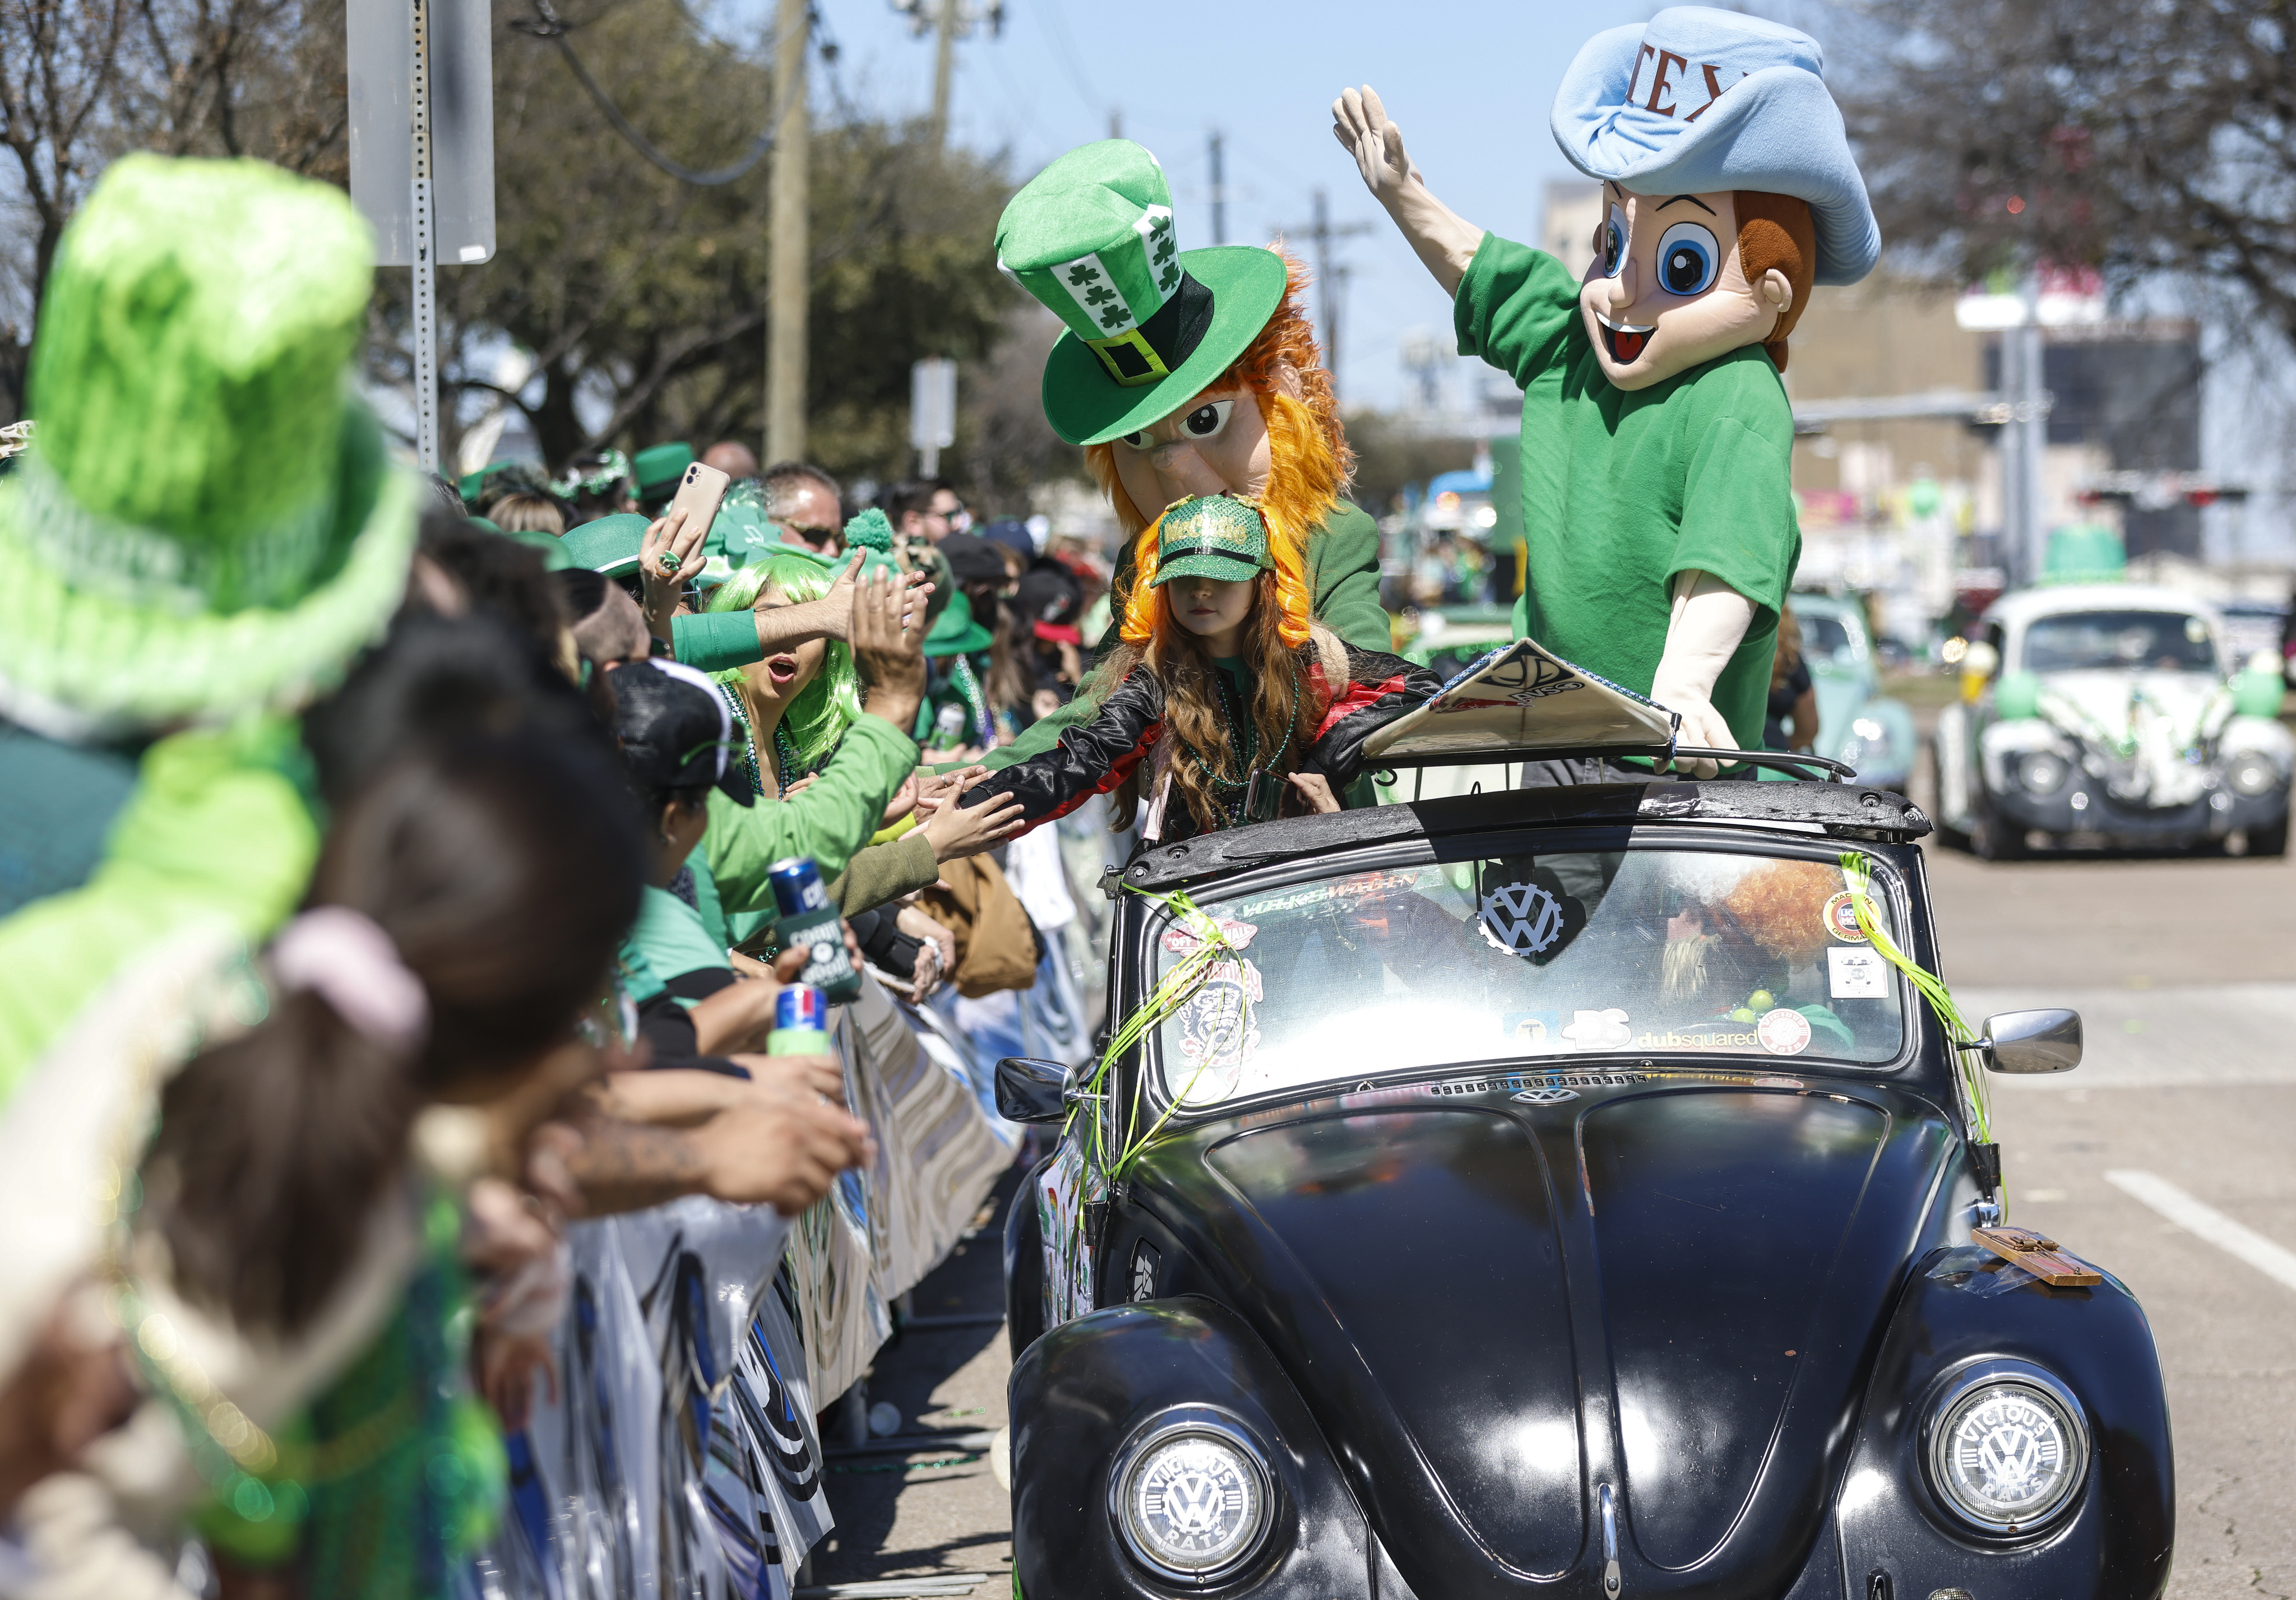 Nowitzki to be Grand Marshal for St. Patrick's Parade & Festival